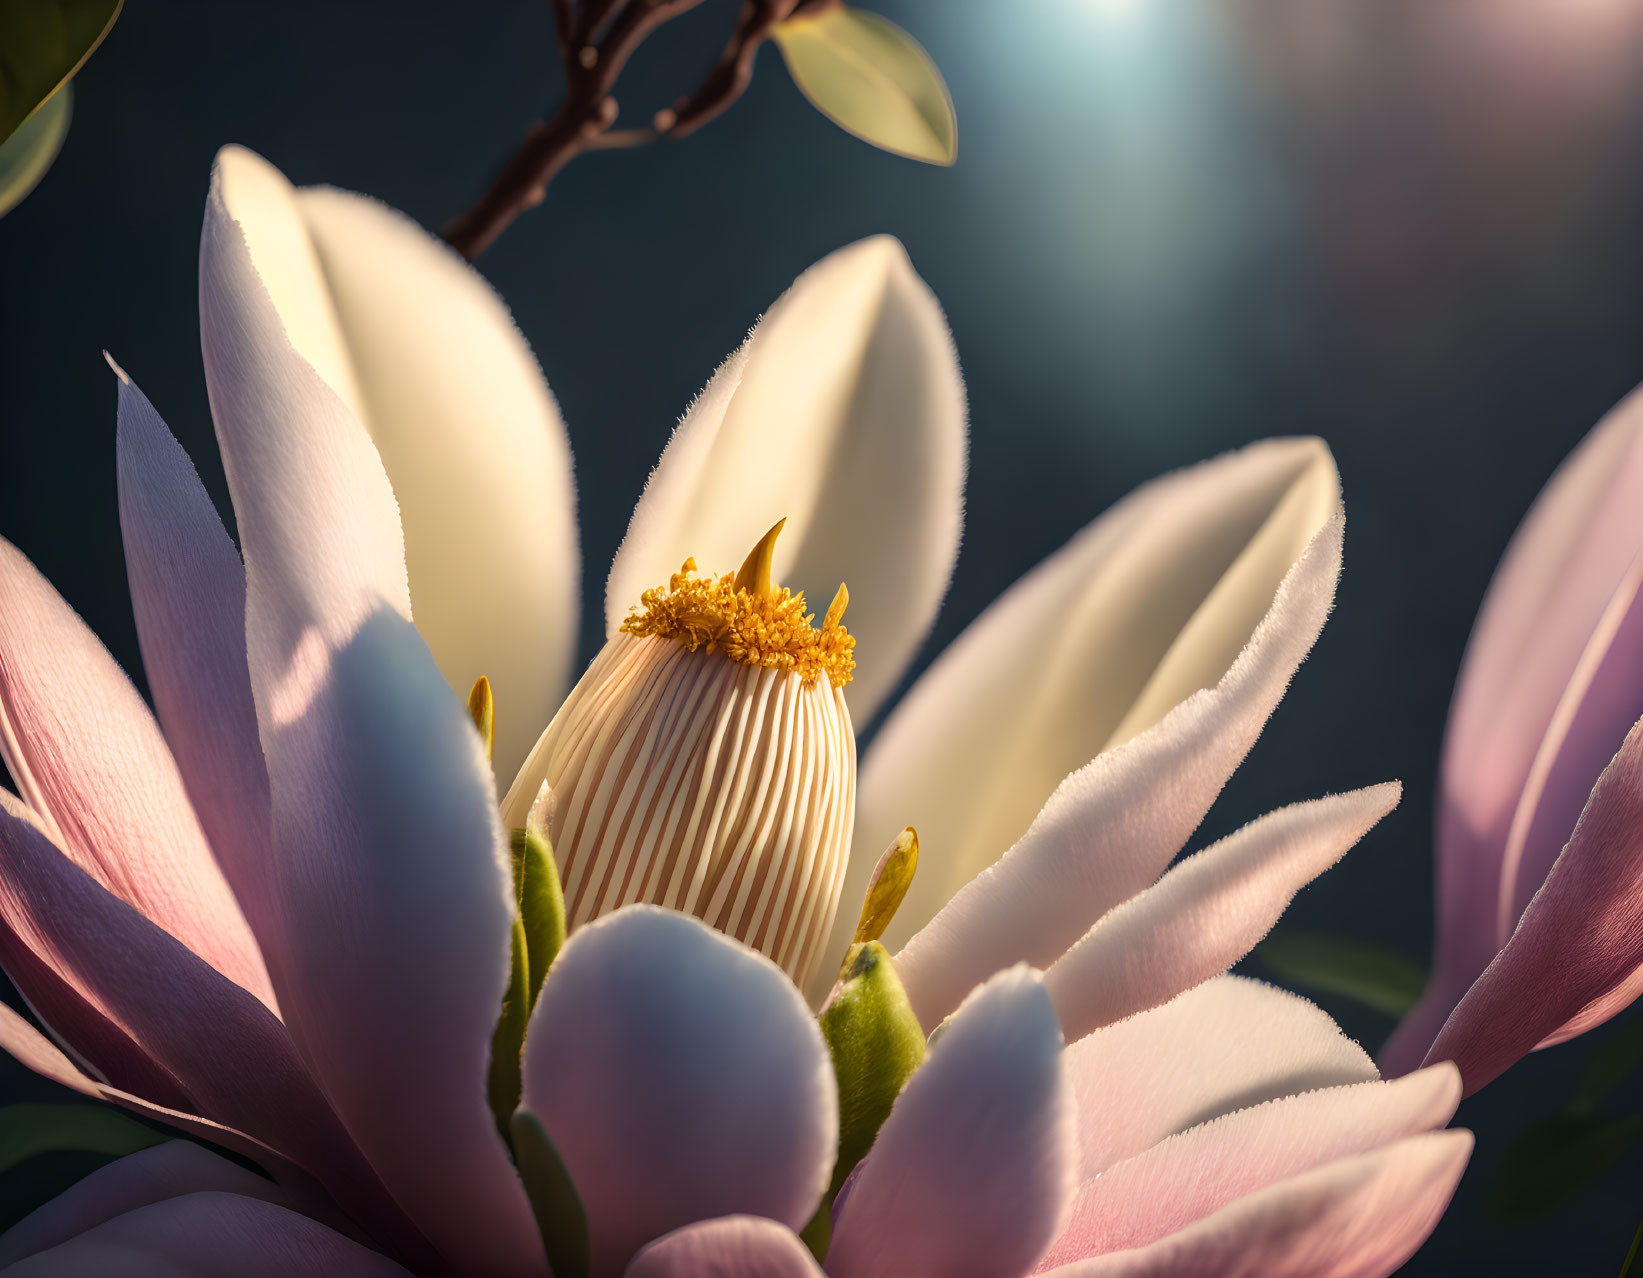 Blooming magnolia flower with pink and white petals in sunlight